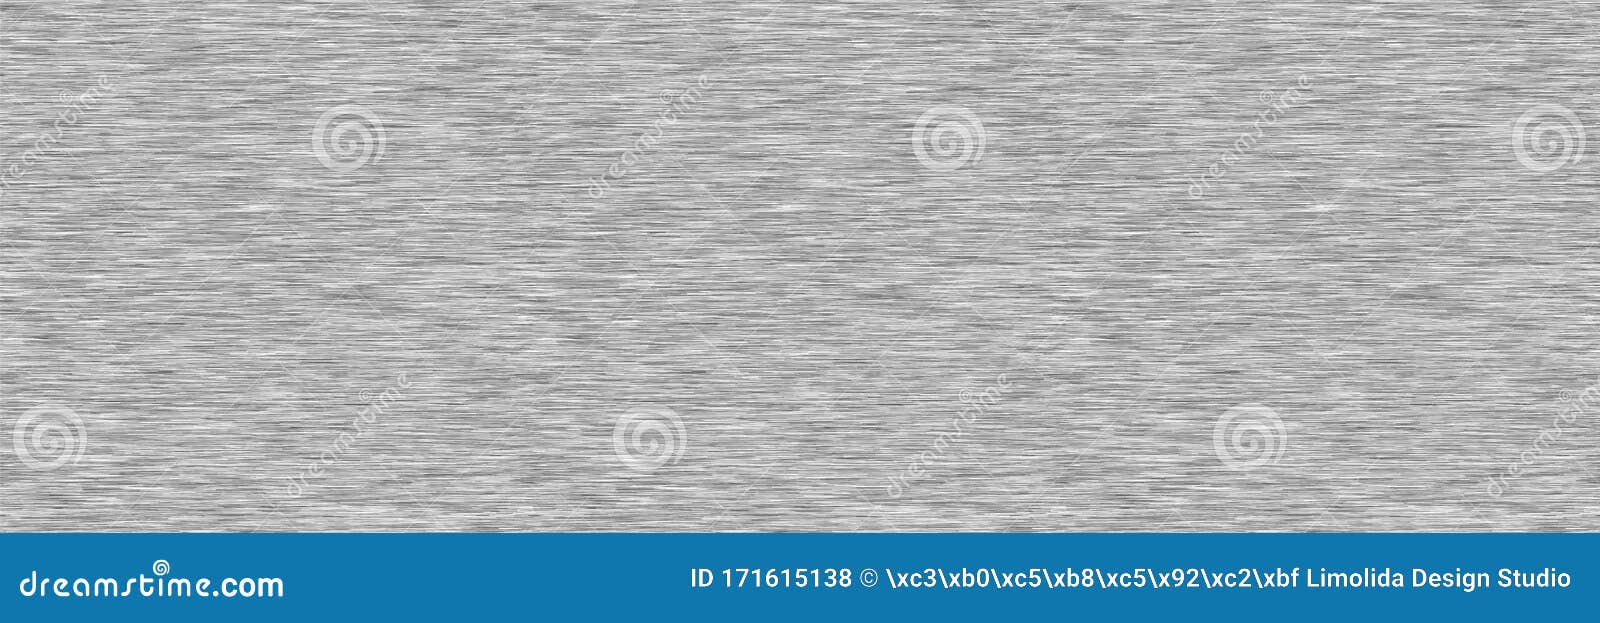 Dark Grey Marl Heather Border Texture Background. Faux Cotton Fabric with  Vertical T Shirt Stripe Stock Vector - Illustration of stripe, neutral:  171615138